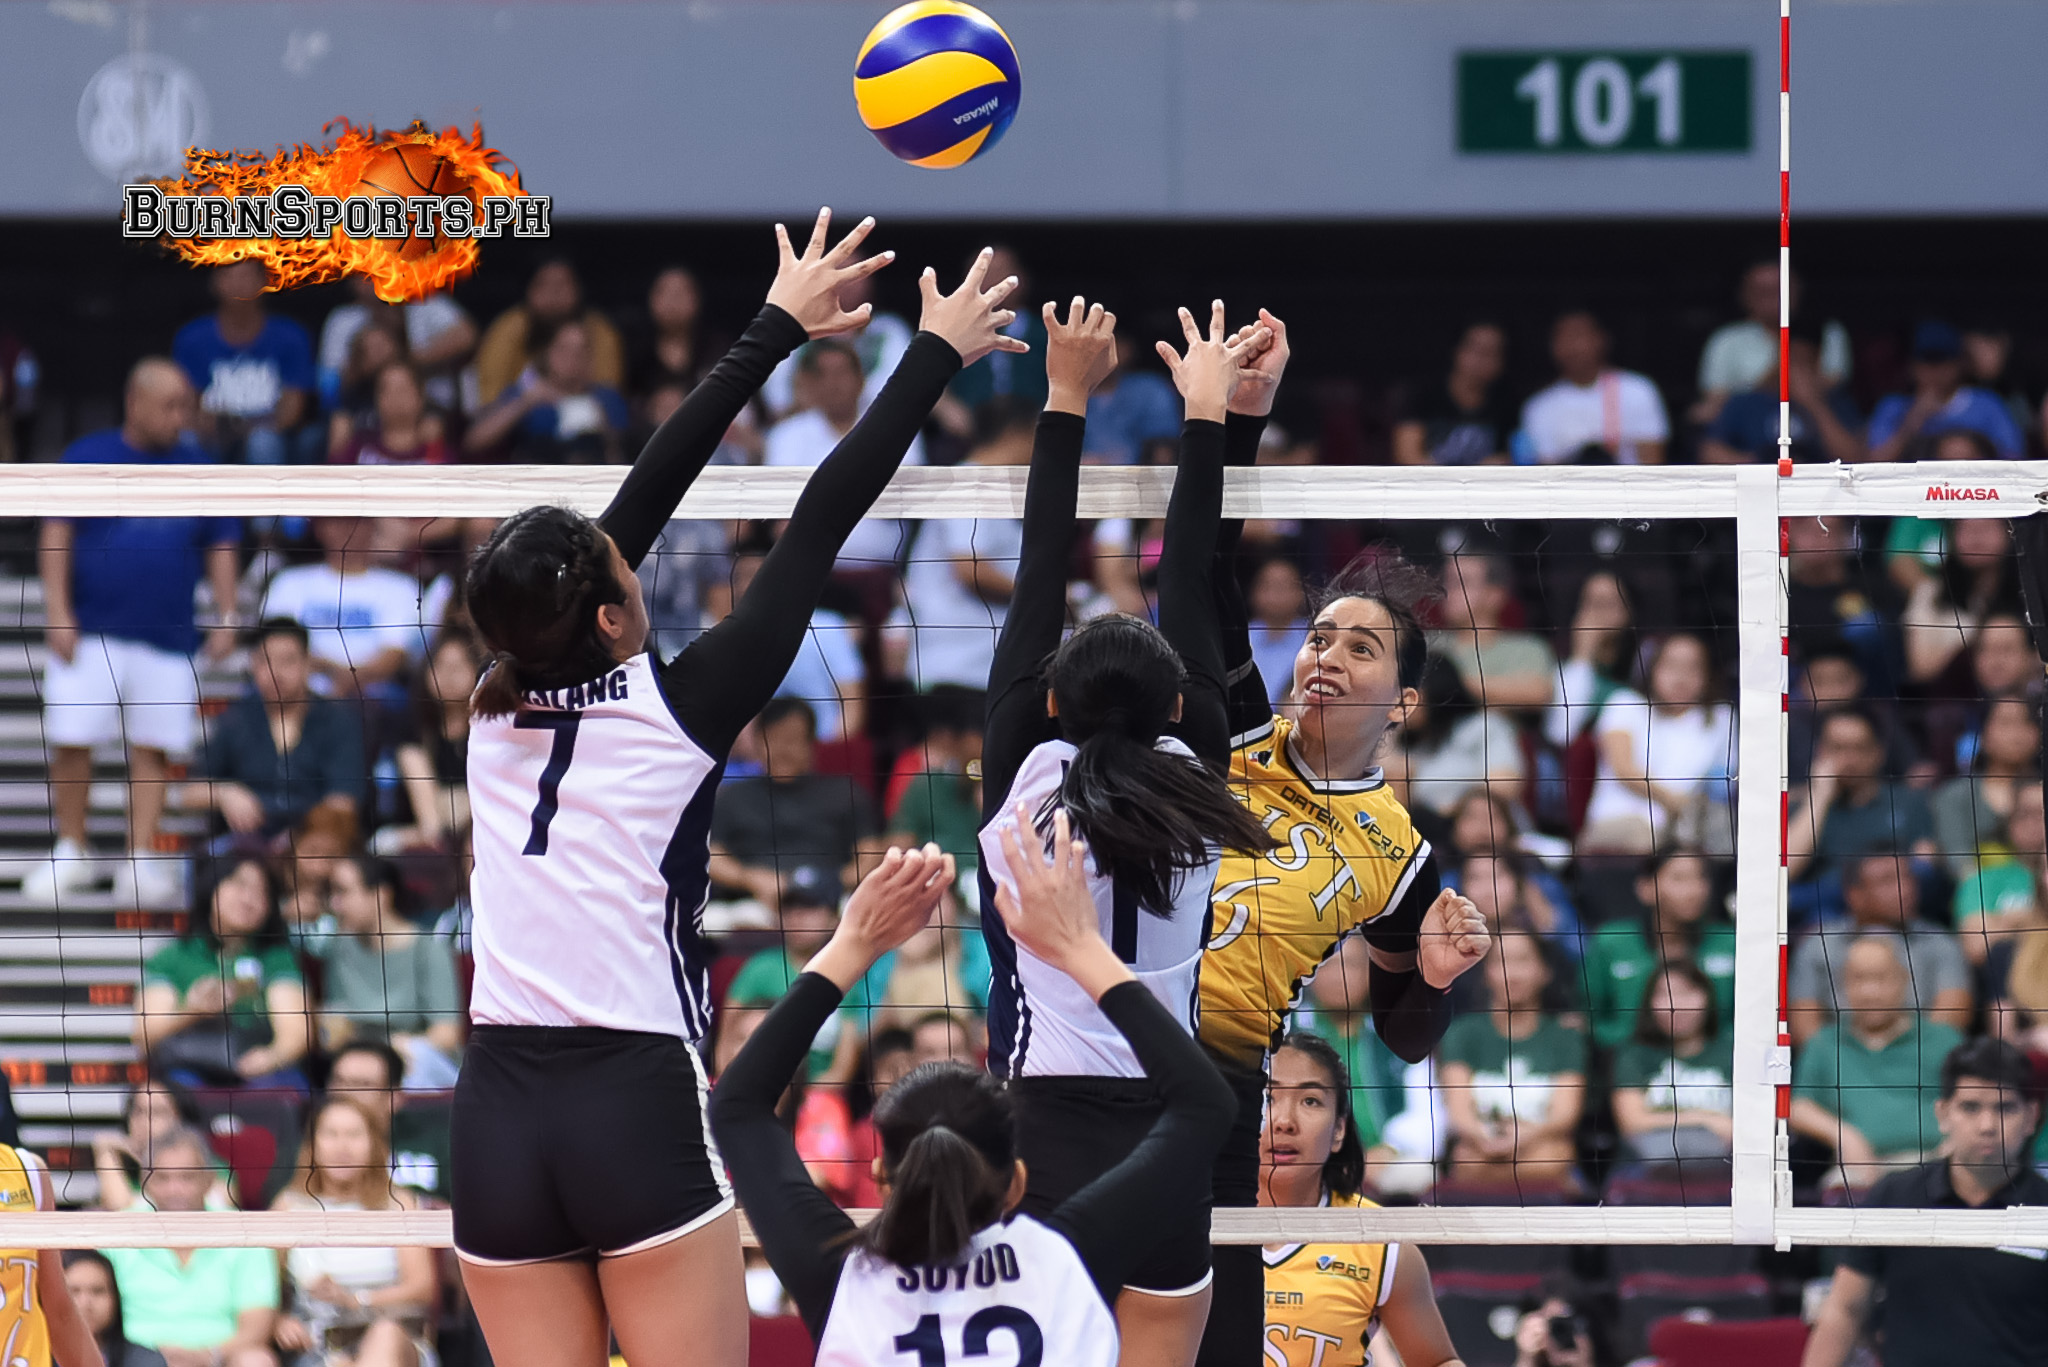 UST shrugs off midway meltdown, outlasts Adamson